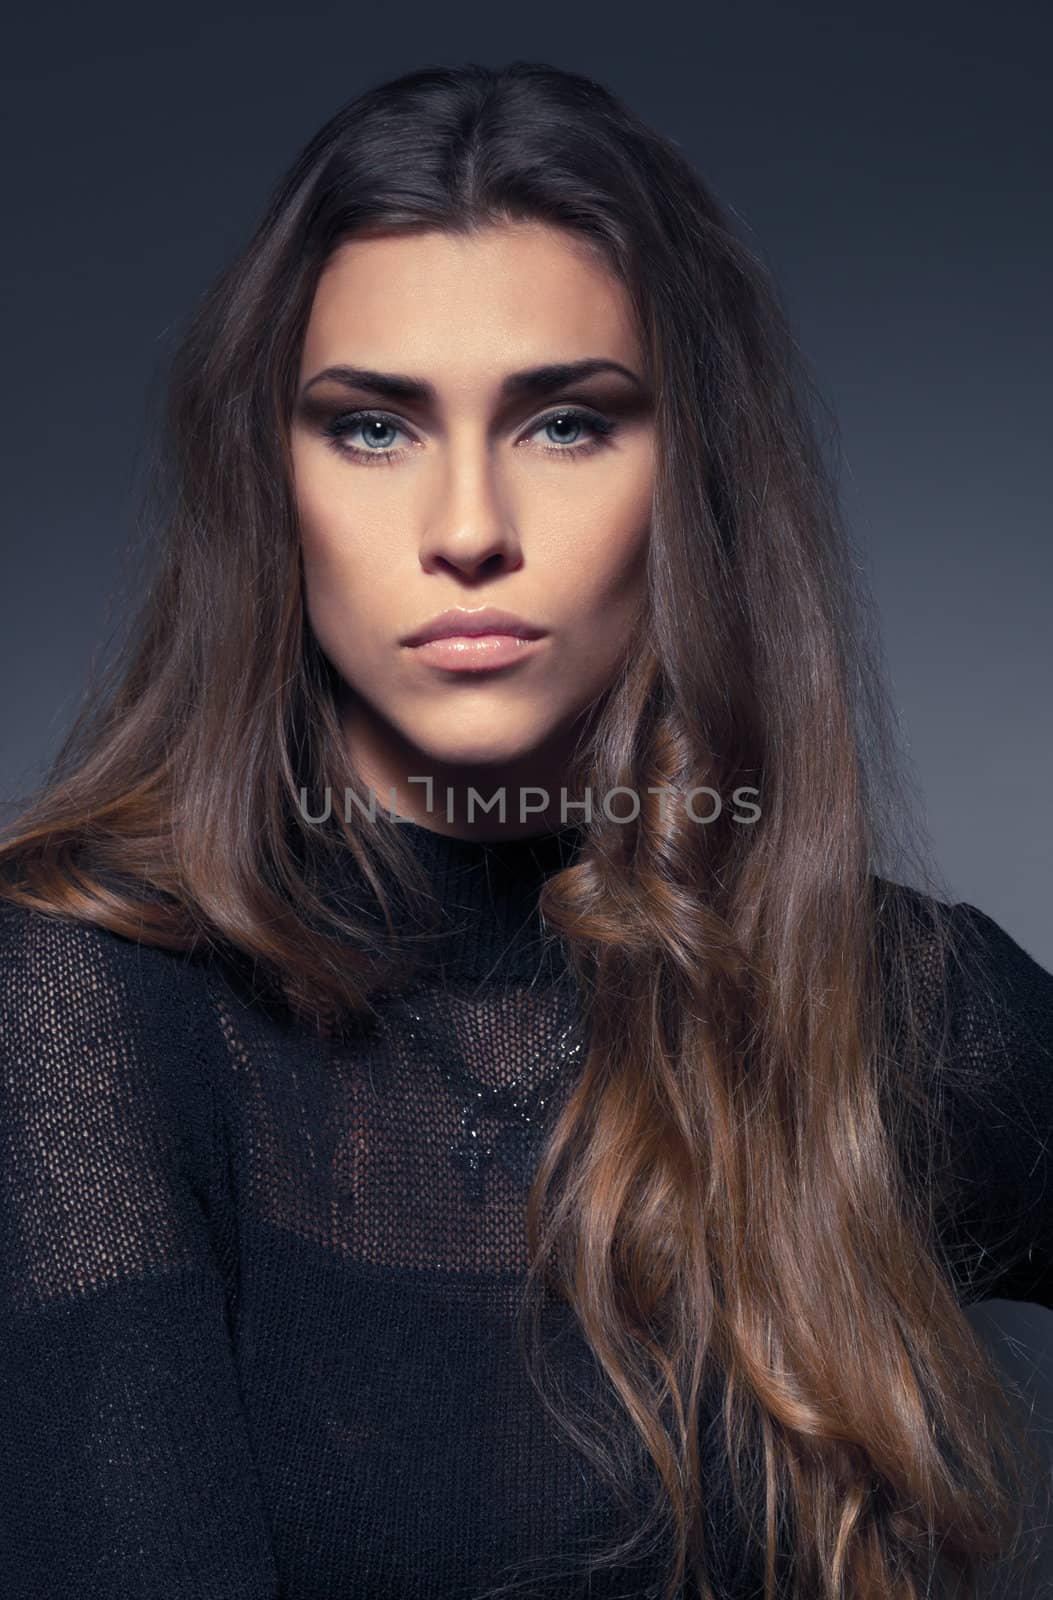 beautiful woman in a black dress in the studio on a dark background